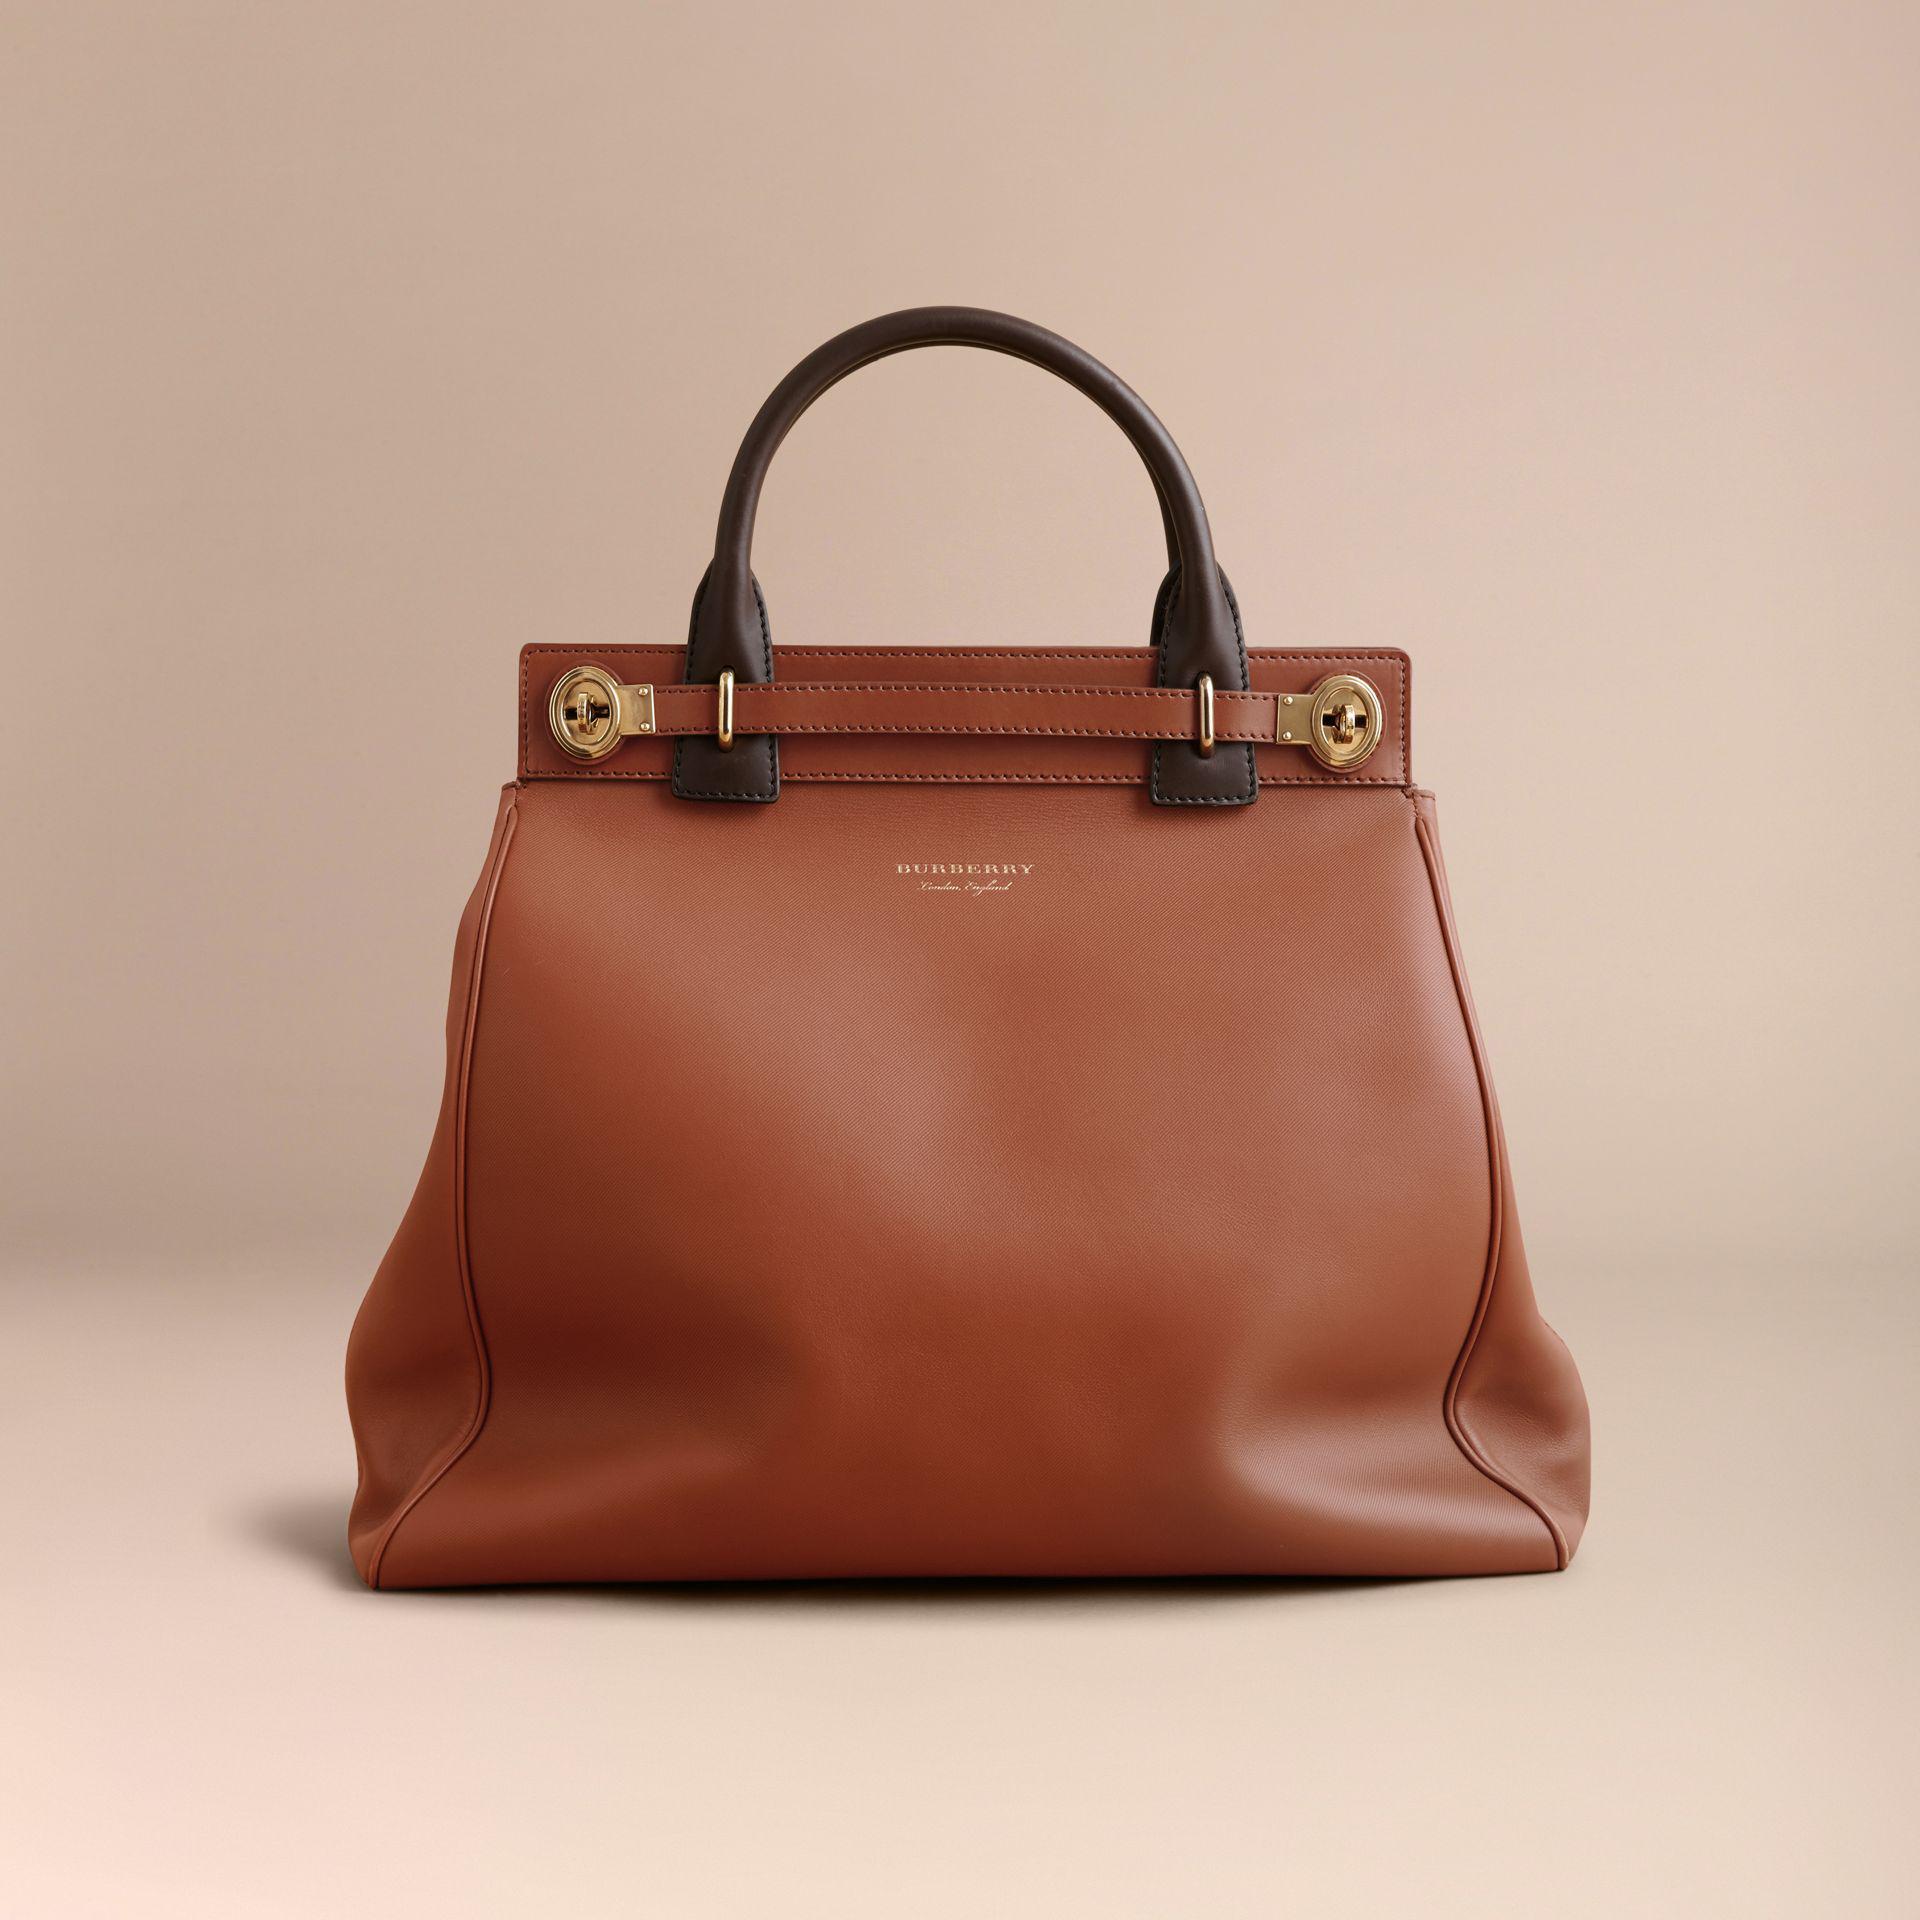 Lyst - Burberry The Dk88 Luggage Bag Tan in Brown for Men